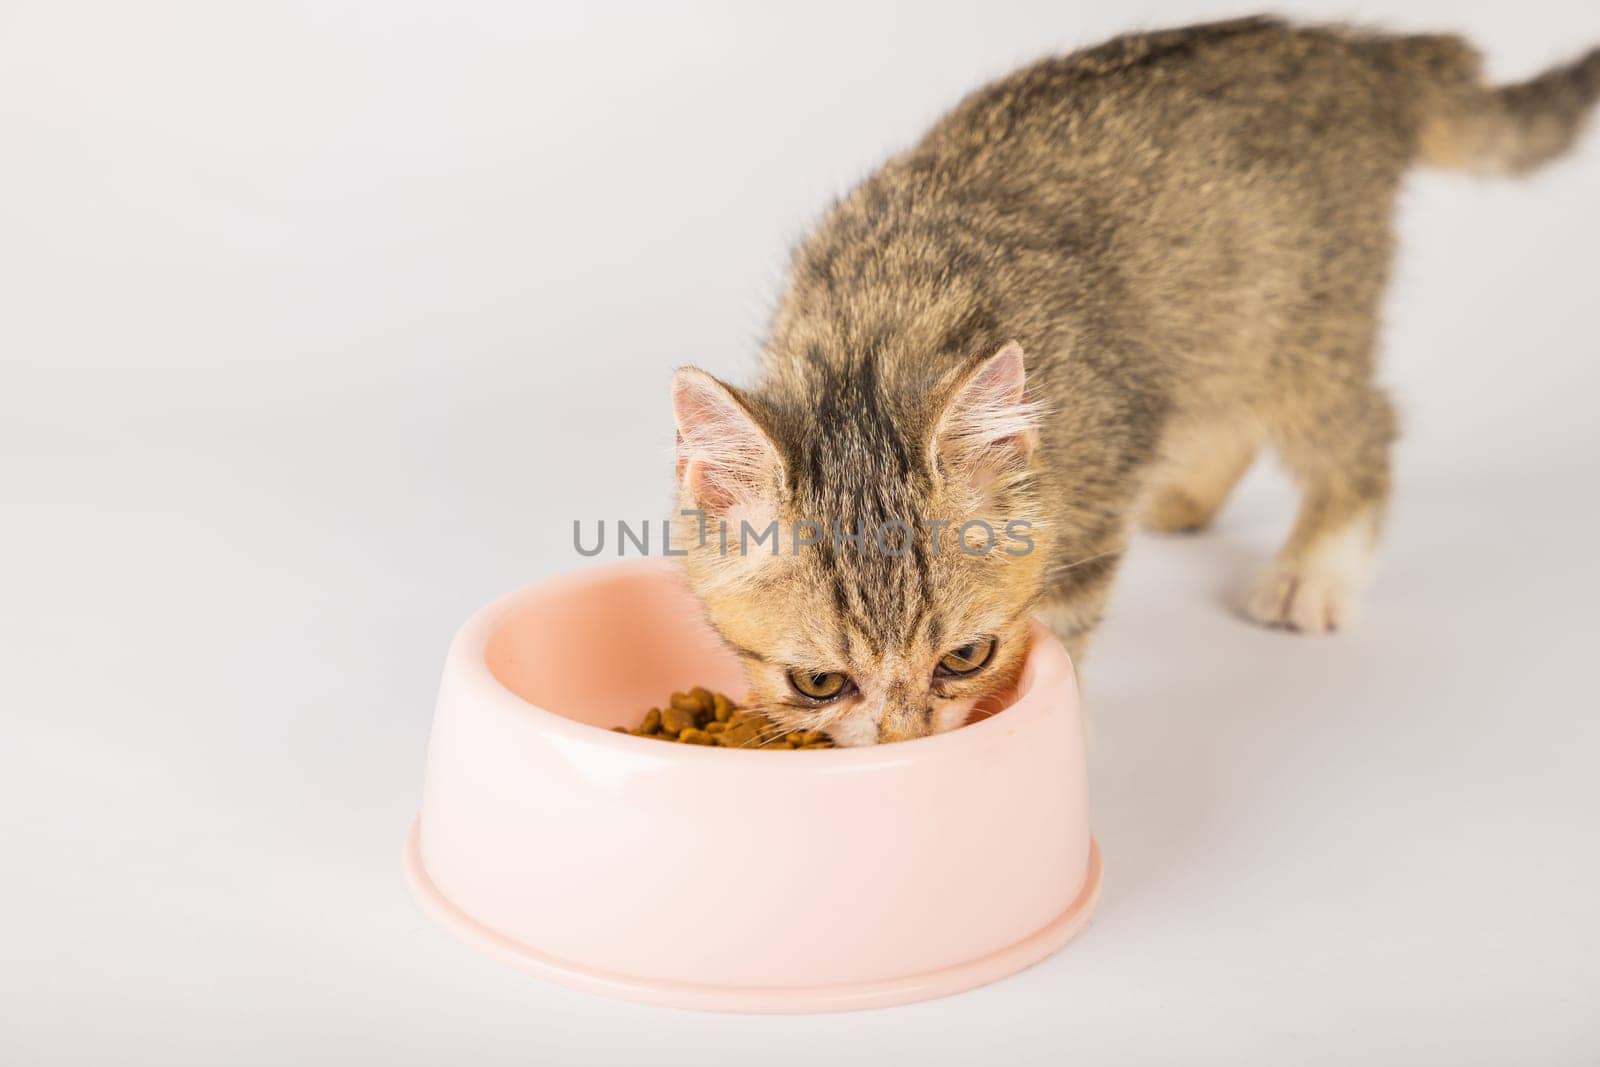 In an isolated setting a cute tabby kitten is sitting next to a food bowl eating its meal on the kitchen floor. The cat's fluffy tail and small tongue add to the endearing portrait.